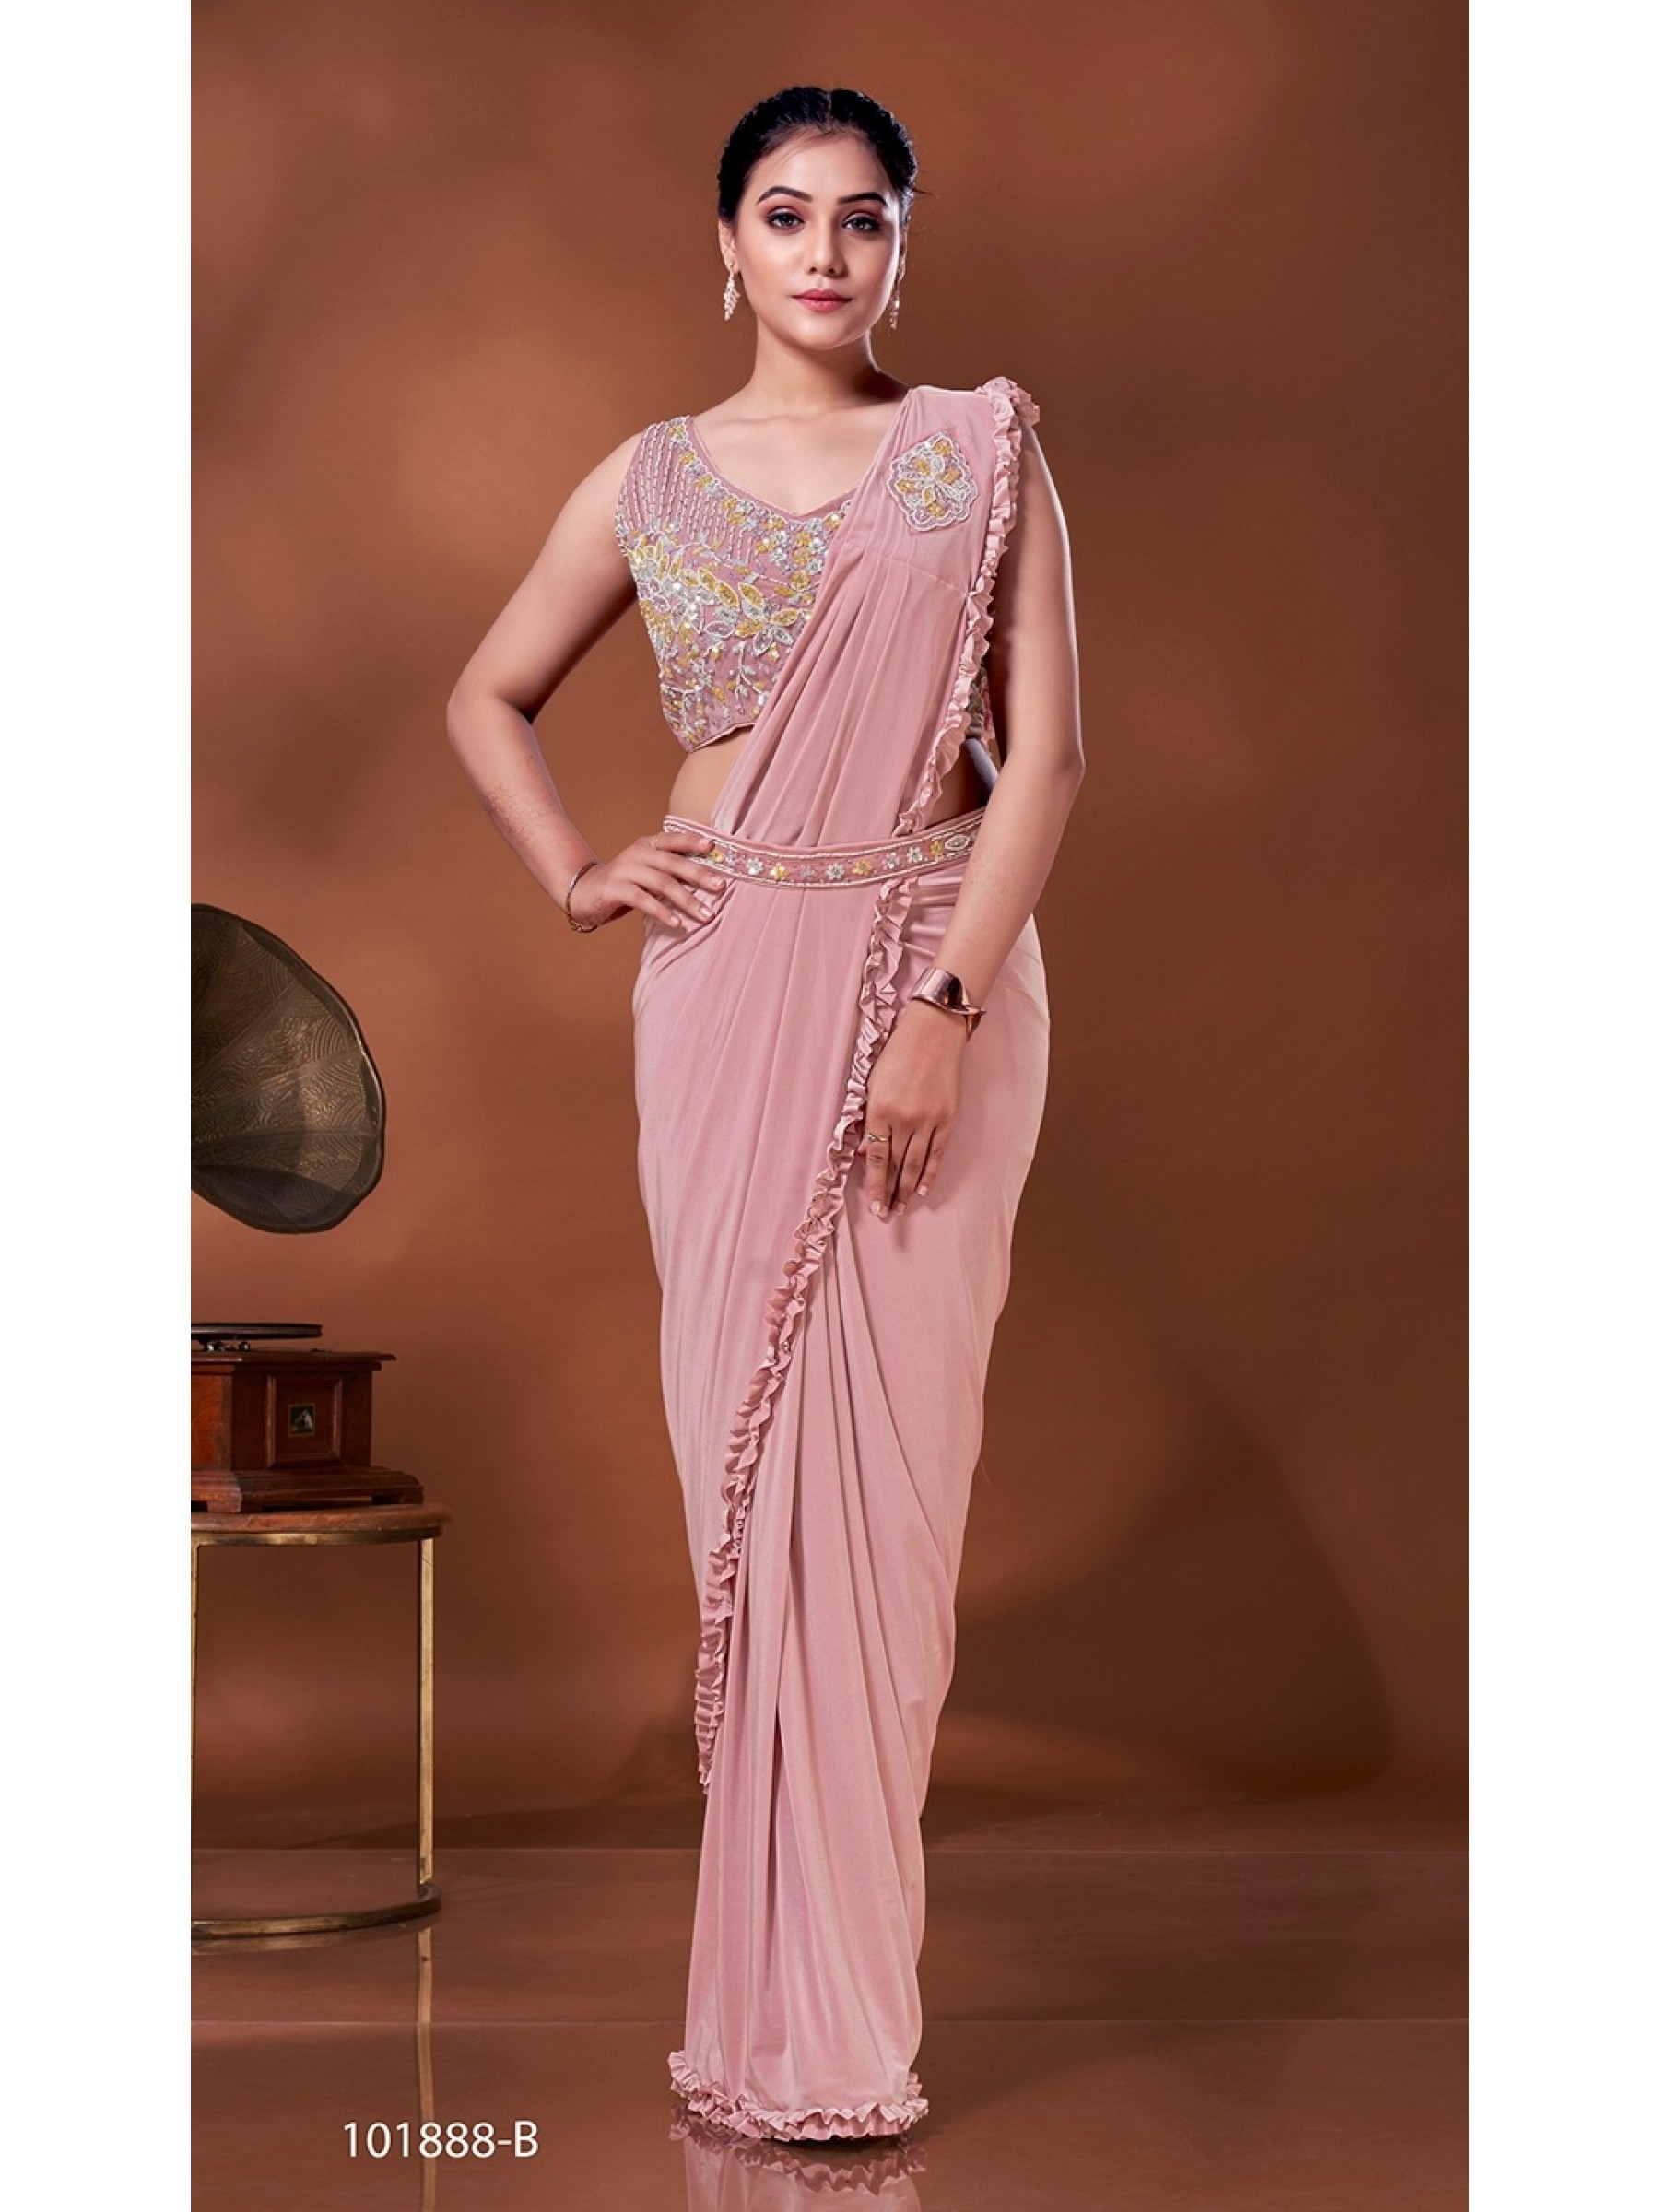 Shimmer Laycra  Fabric Party Wear  Saree In Pink Color With Embroidery Work